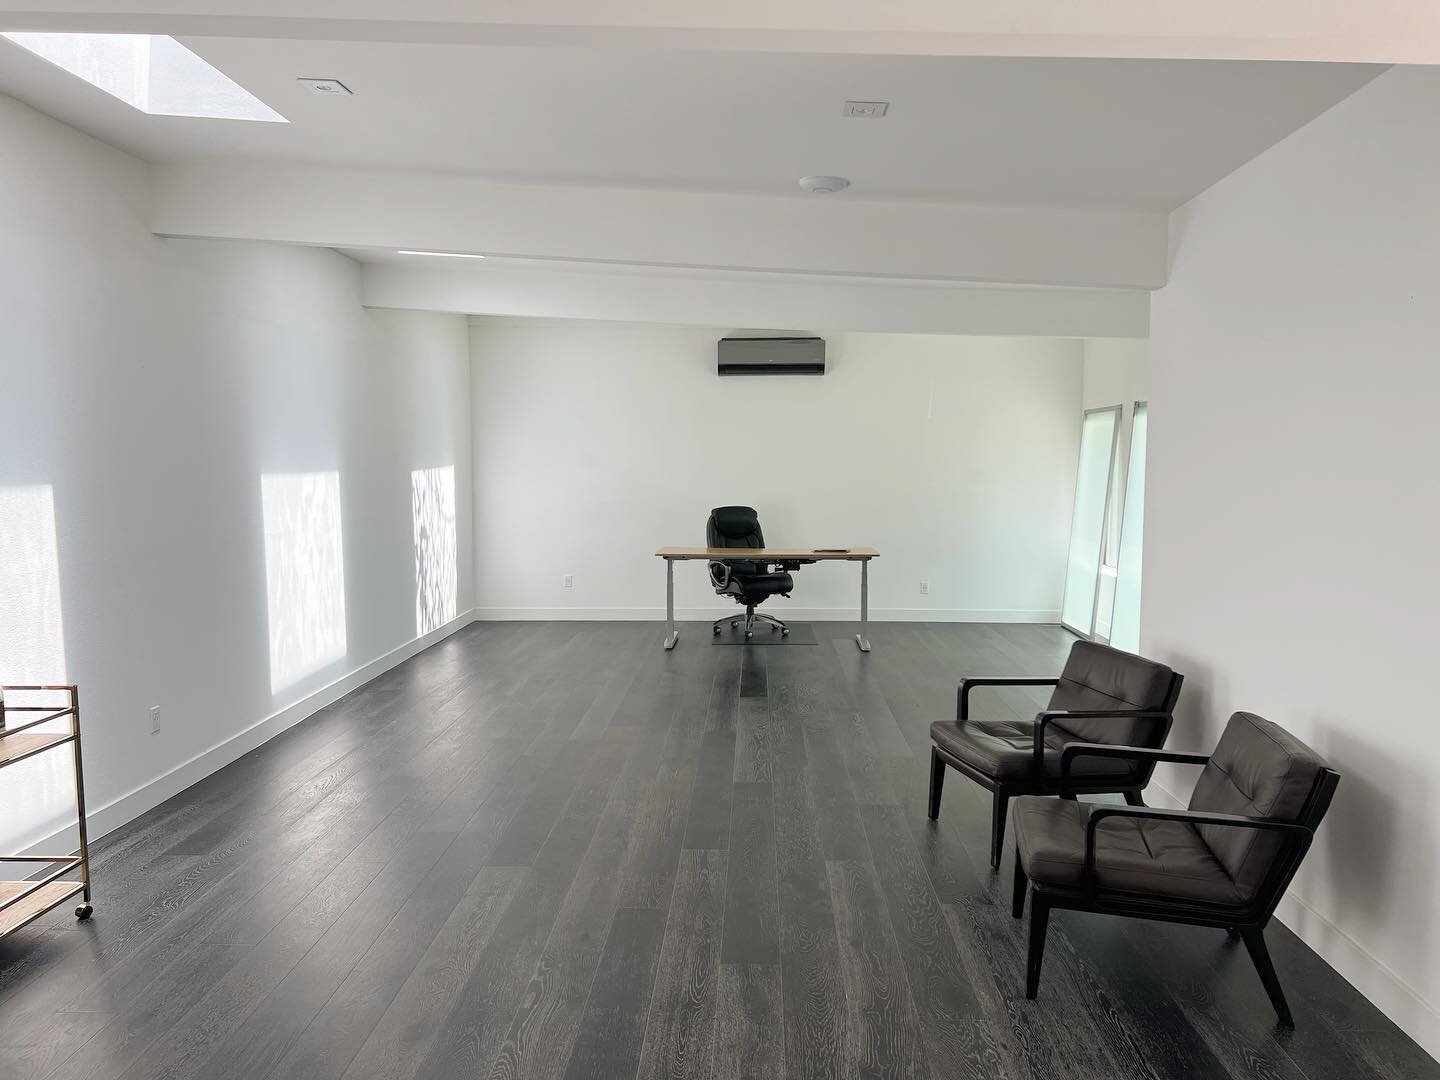 The Lexington Boss Building. 

Office for rent with a ton of amenities and options for added work spaces and shooting (photos, videos) spaces. 

Come check it out! 

#officespaceinhollywood #workspaceforrent